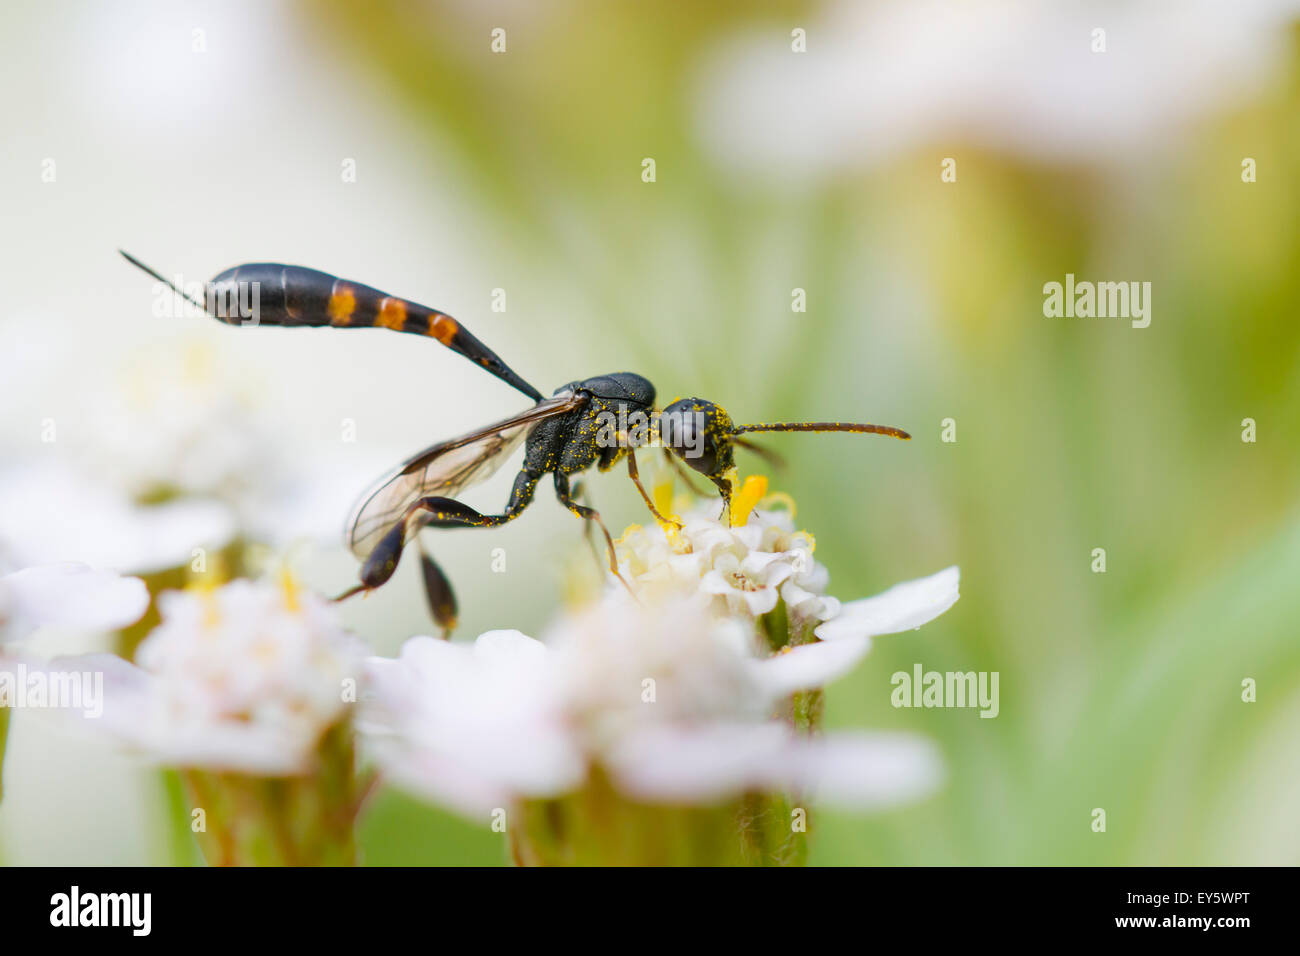 Parasitic wasp on Yarrow flowers - Alsace France Stock Photo